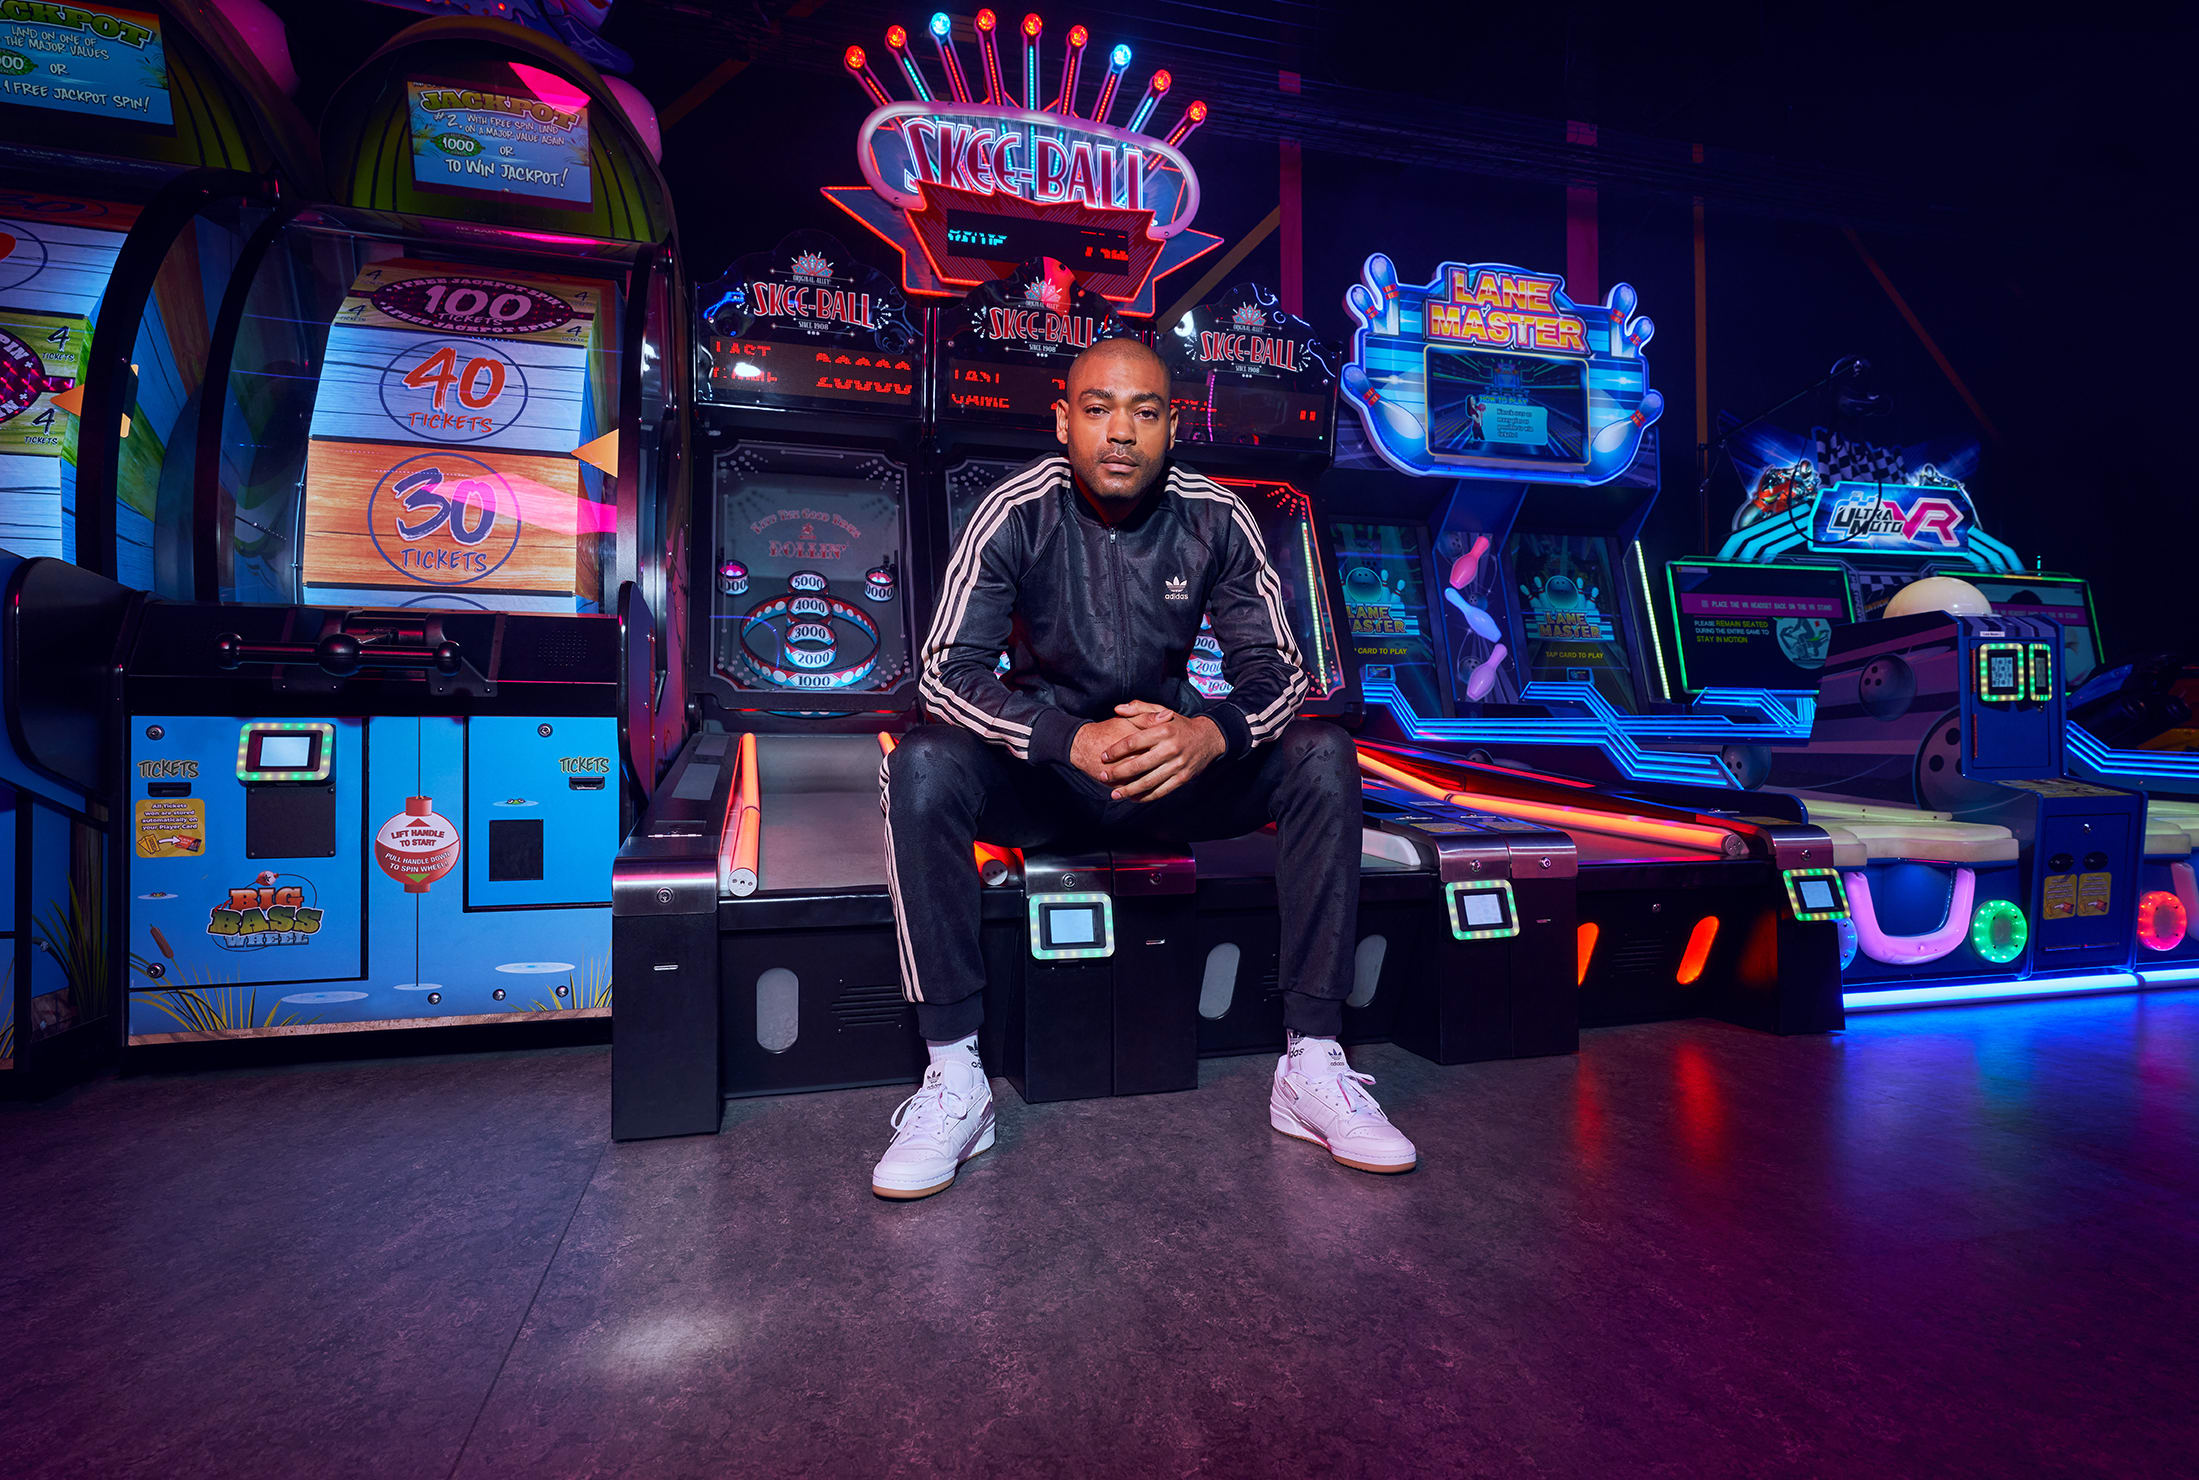 Kano for JD Sports in a games arcade